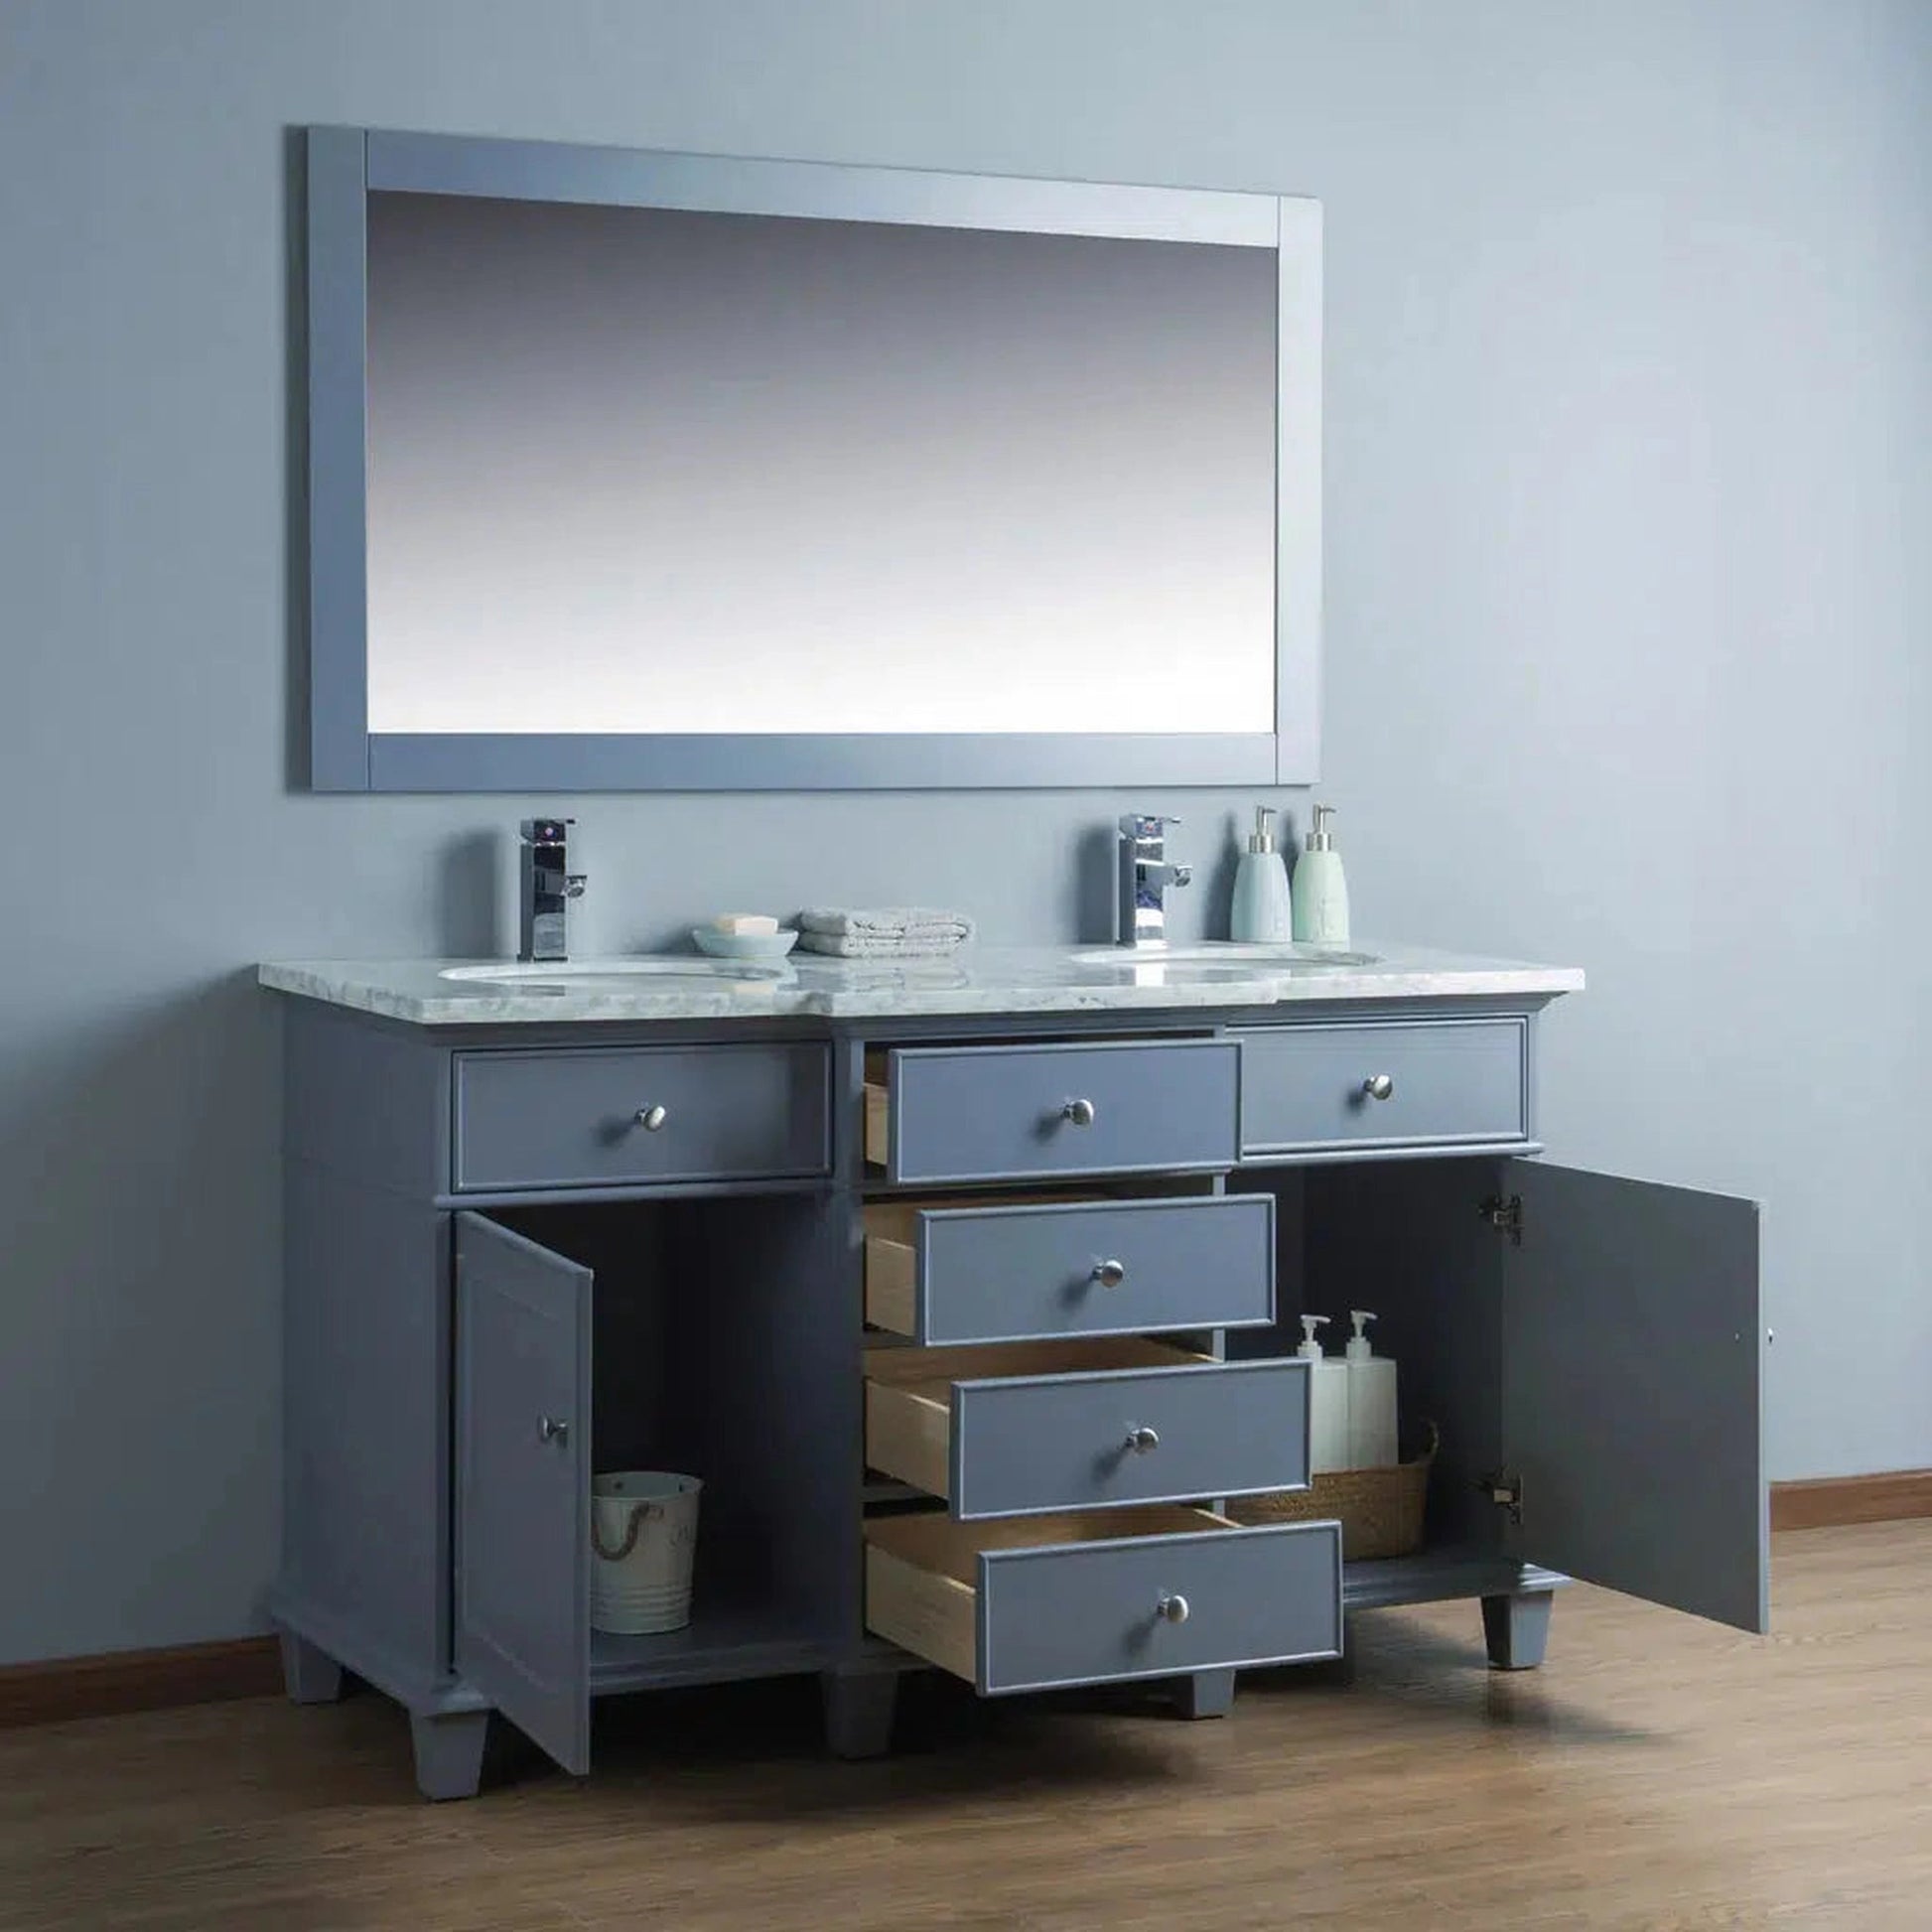 Stufurhome Cadence 60" Grey Freestanding Bathroom Vanity With Oval Double Sinks, Carrara White Marble Top, Wooden Framed Mirror, 4 Drawers, 2 Doors and 2 Pre-Drilled Faucet Holes